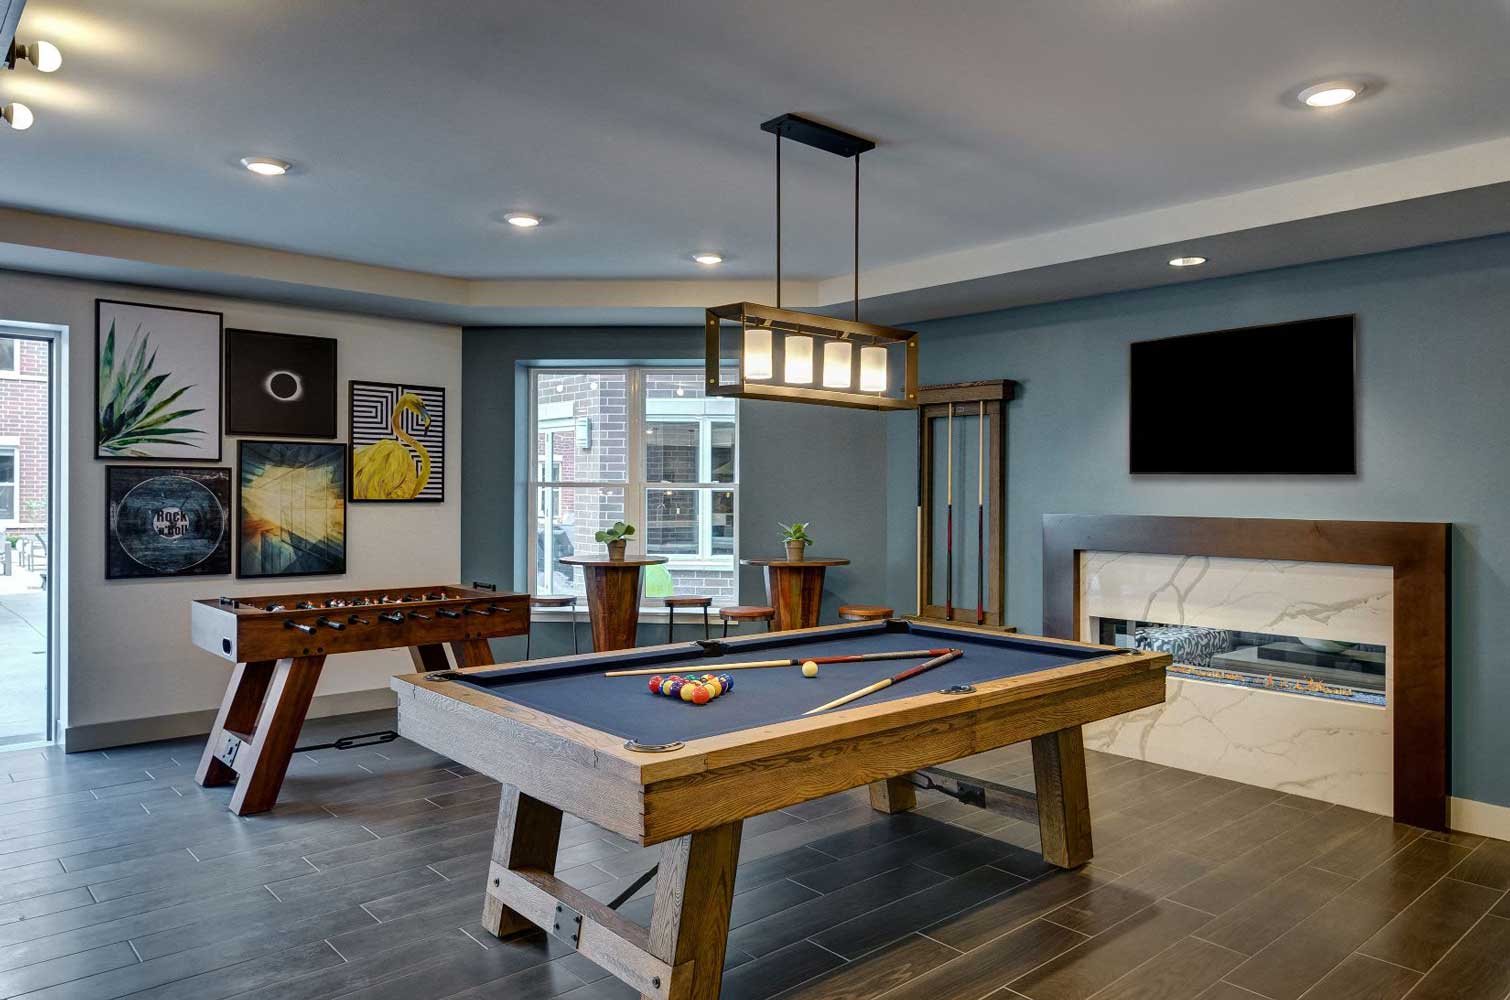 Game Room at Buckingham Place Apartments in Des Plaines, IL